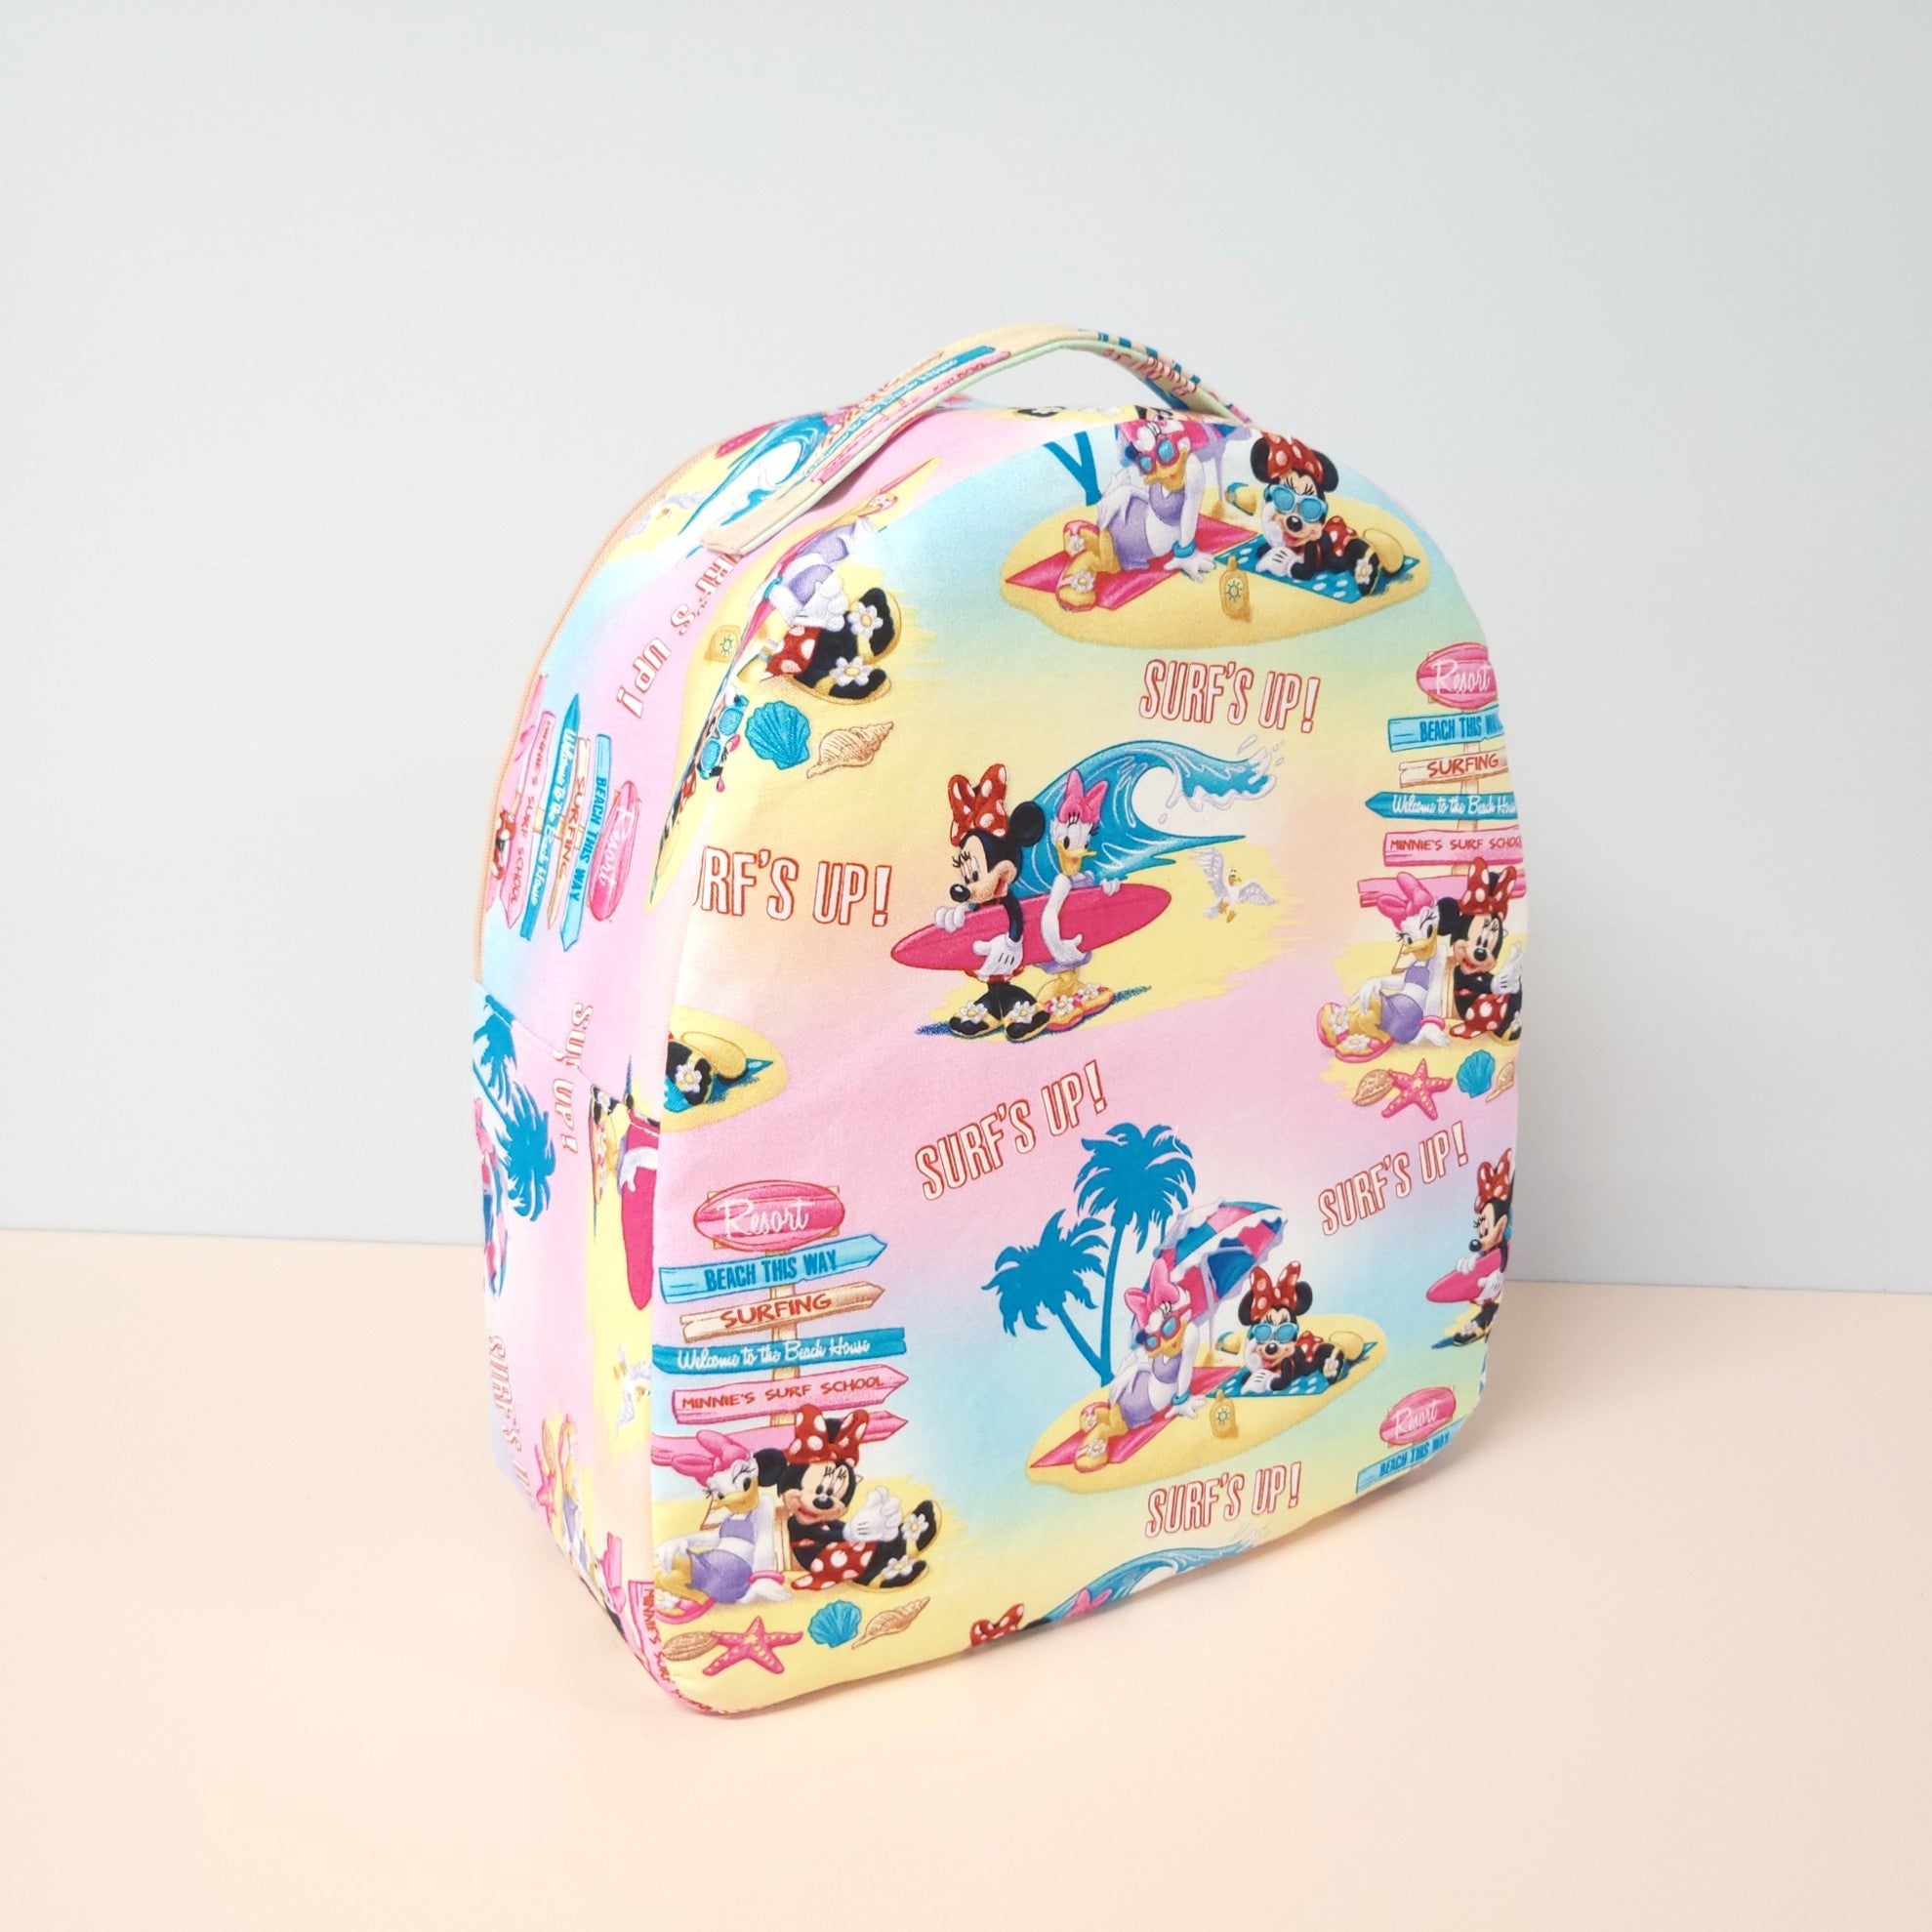 Surfs up minnie and daisy mini backpack.